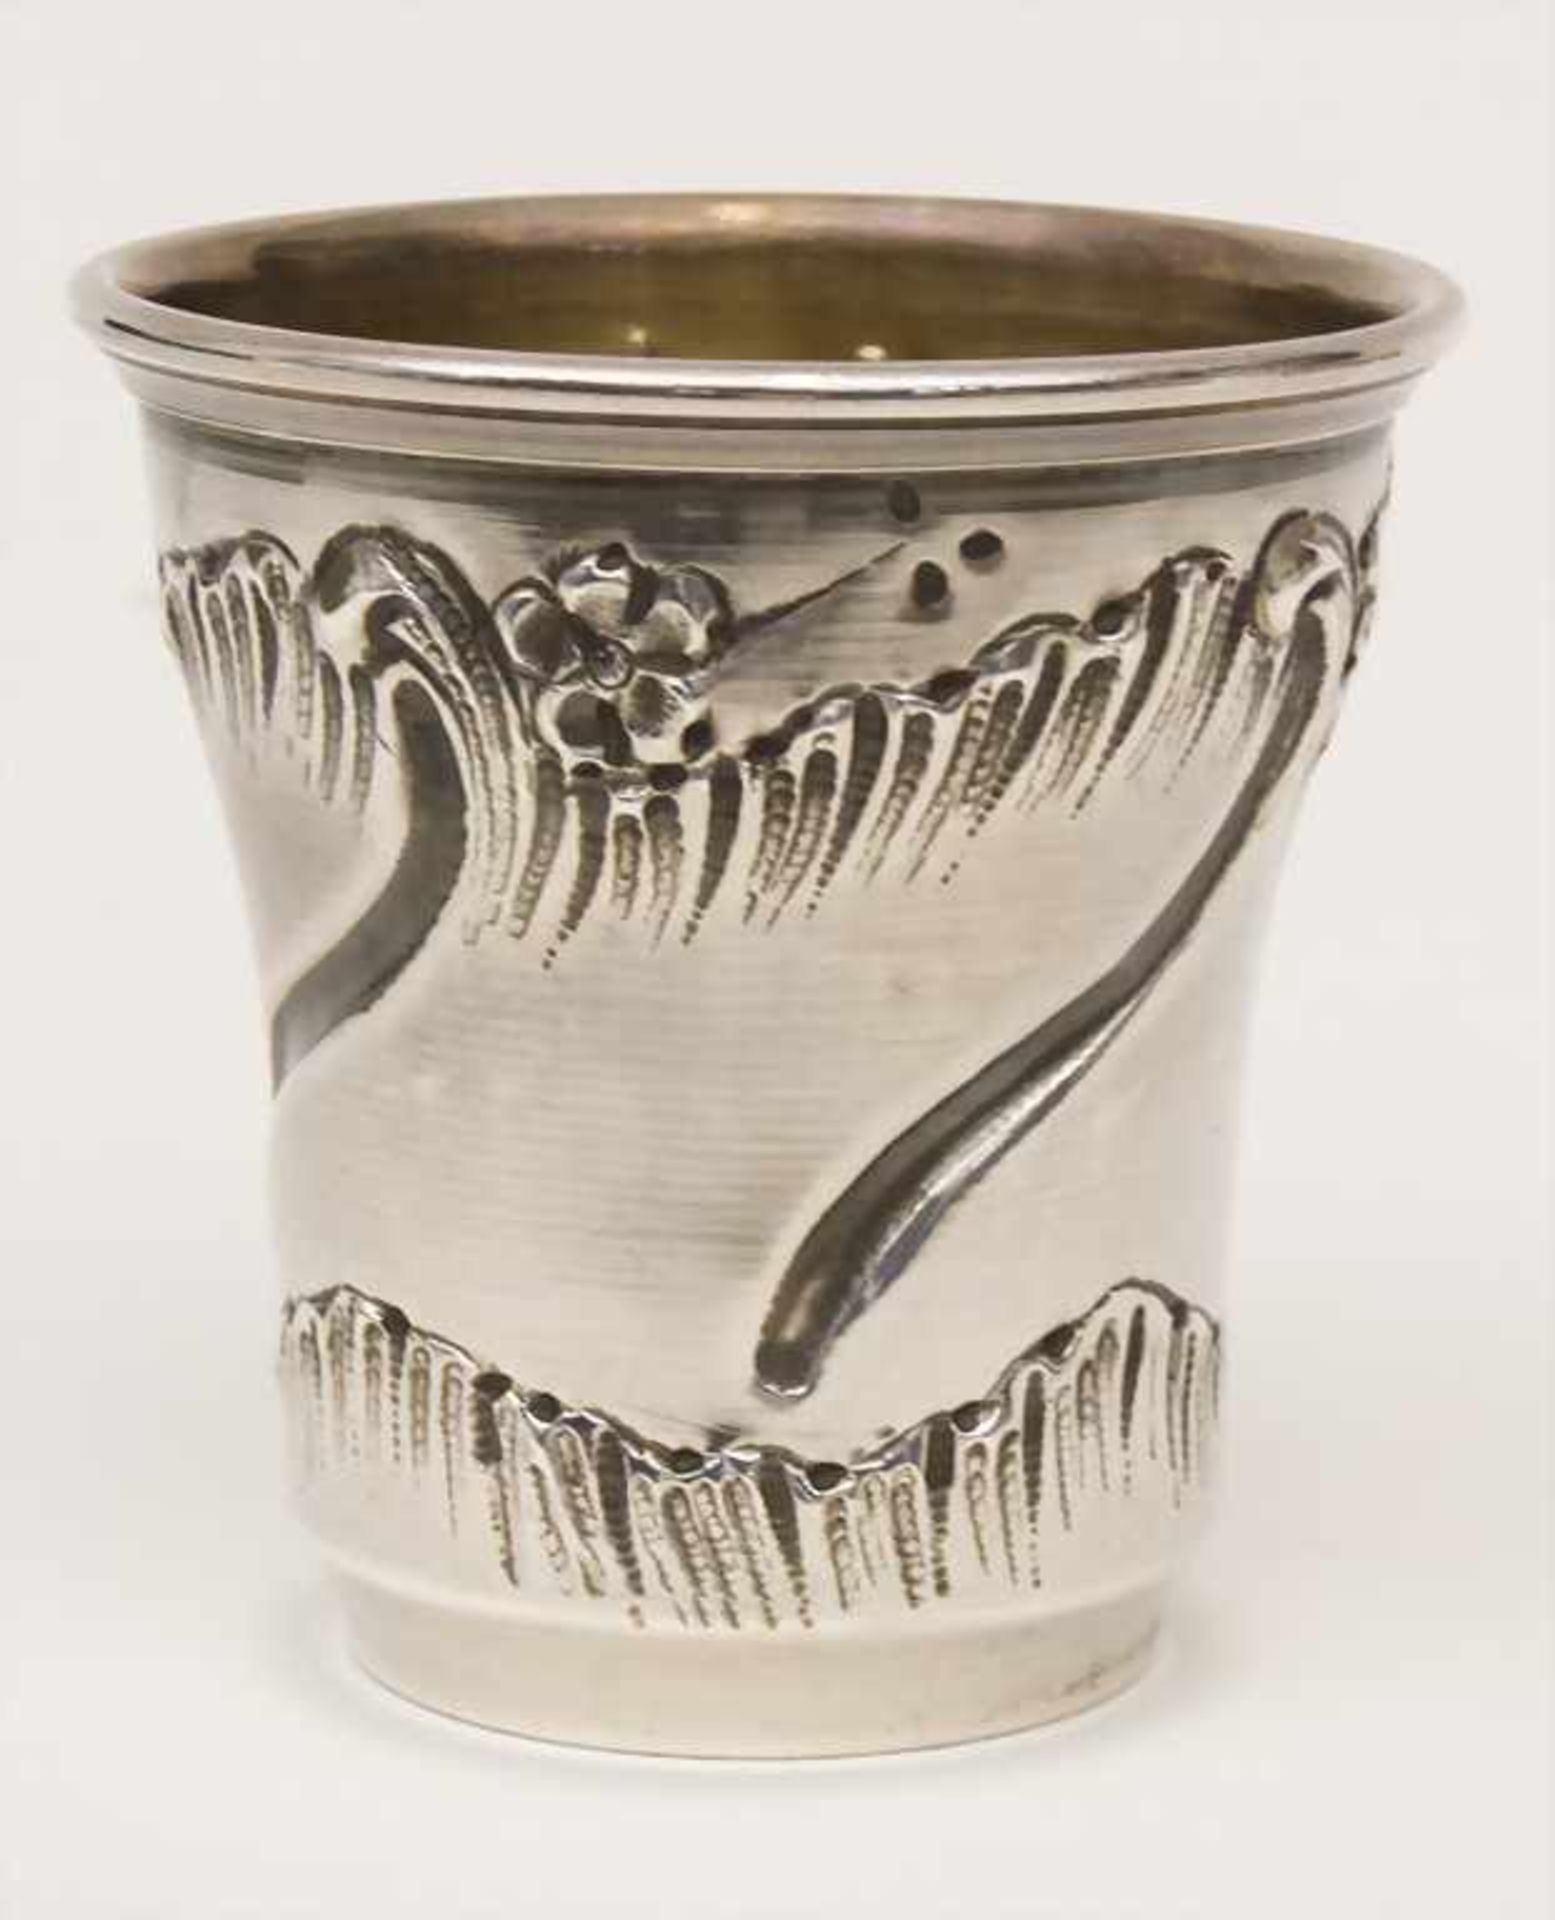 6 Schnapsbecher und Tablett in Schatulle / 6 silver cups and tray with case, Henry Soufflot, - Image 10 of 19